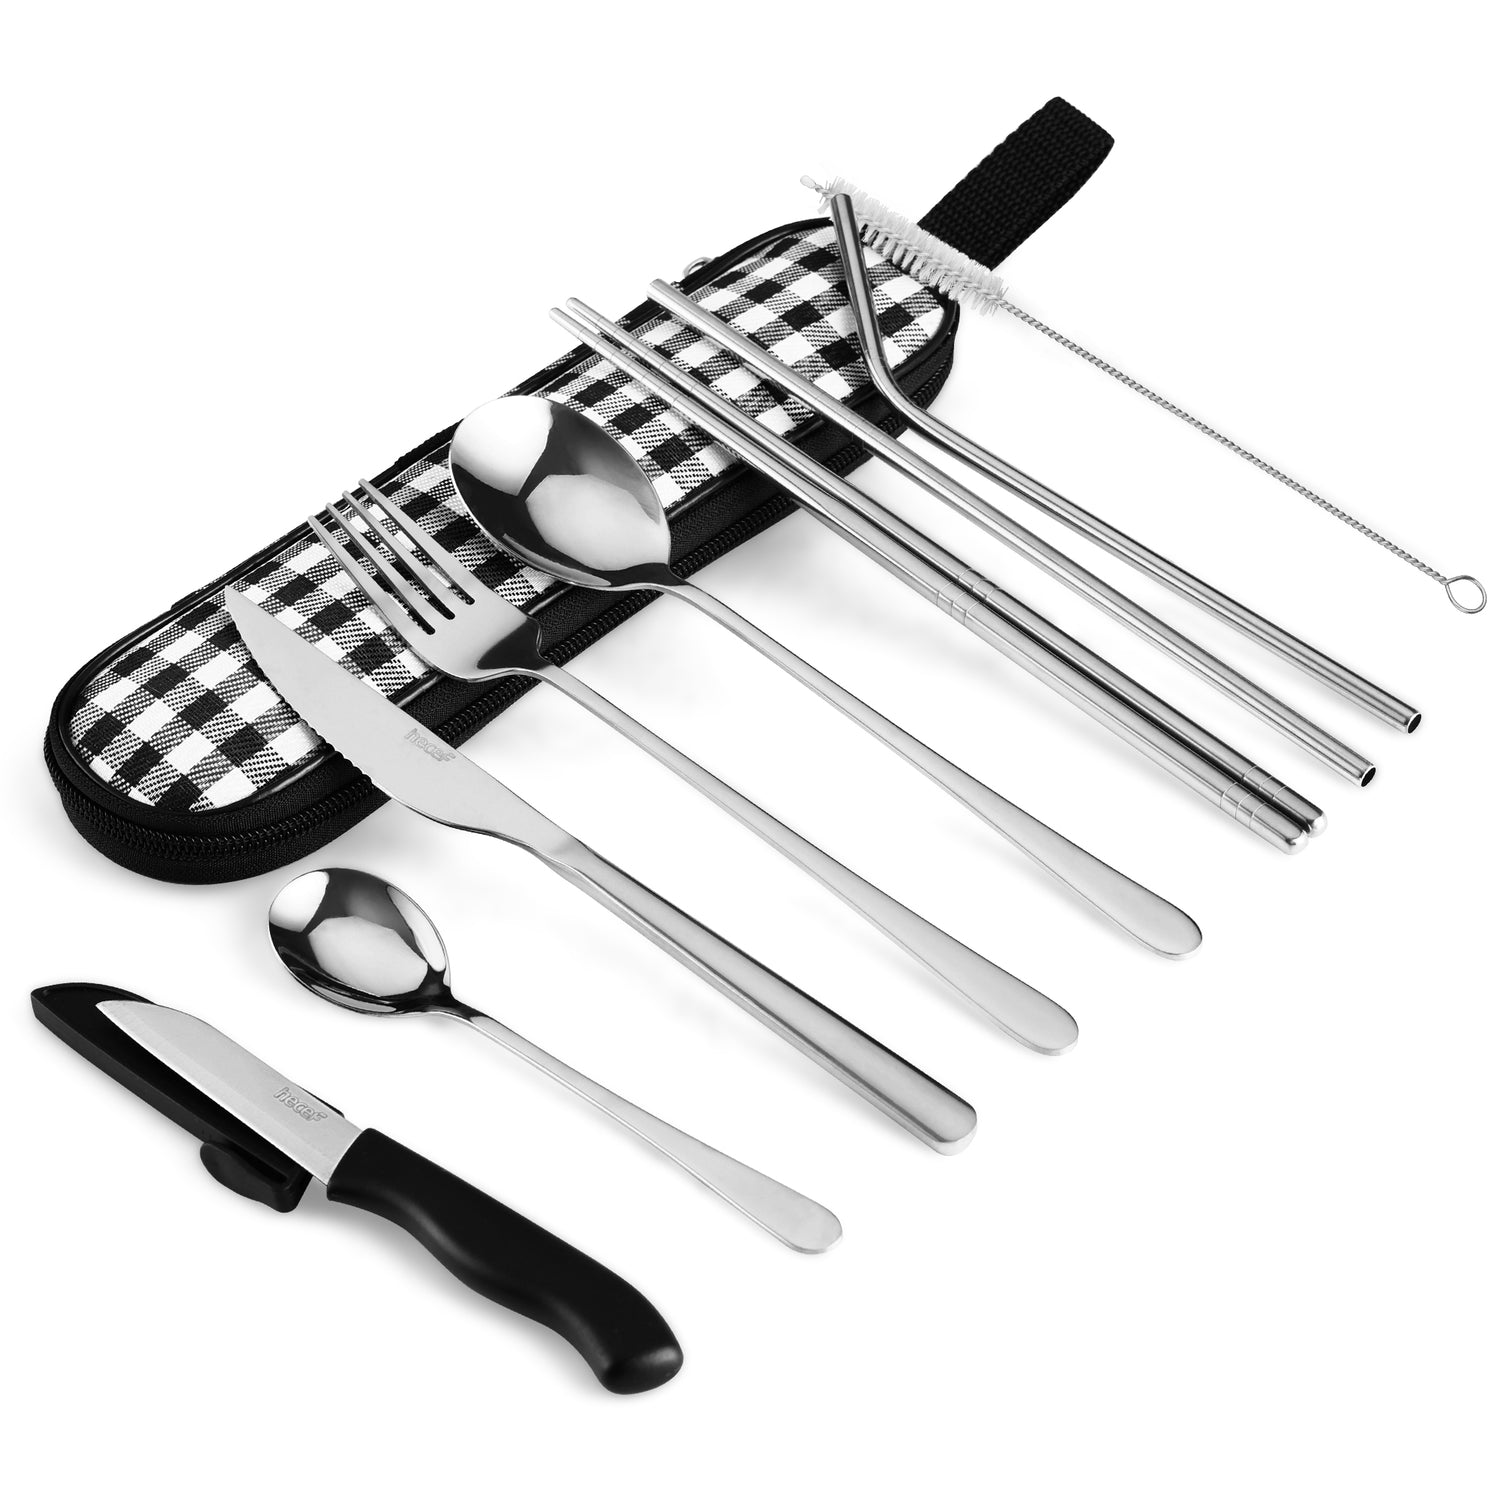 Stainless Steel Travel Cutlery Utensils Set With Case, Reusable